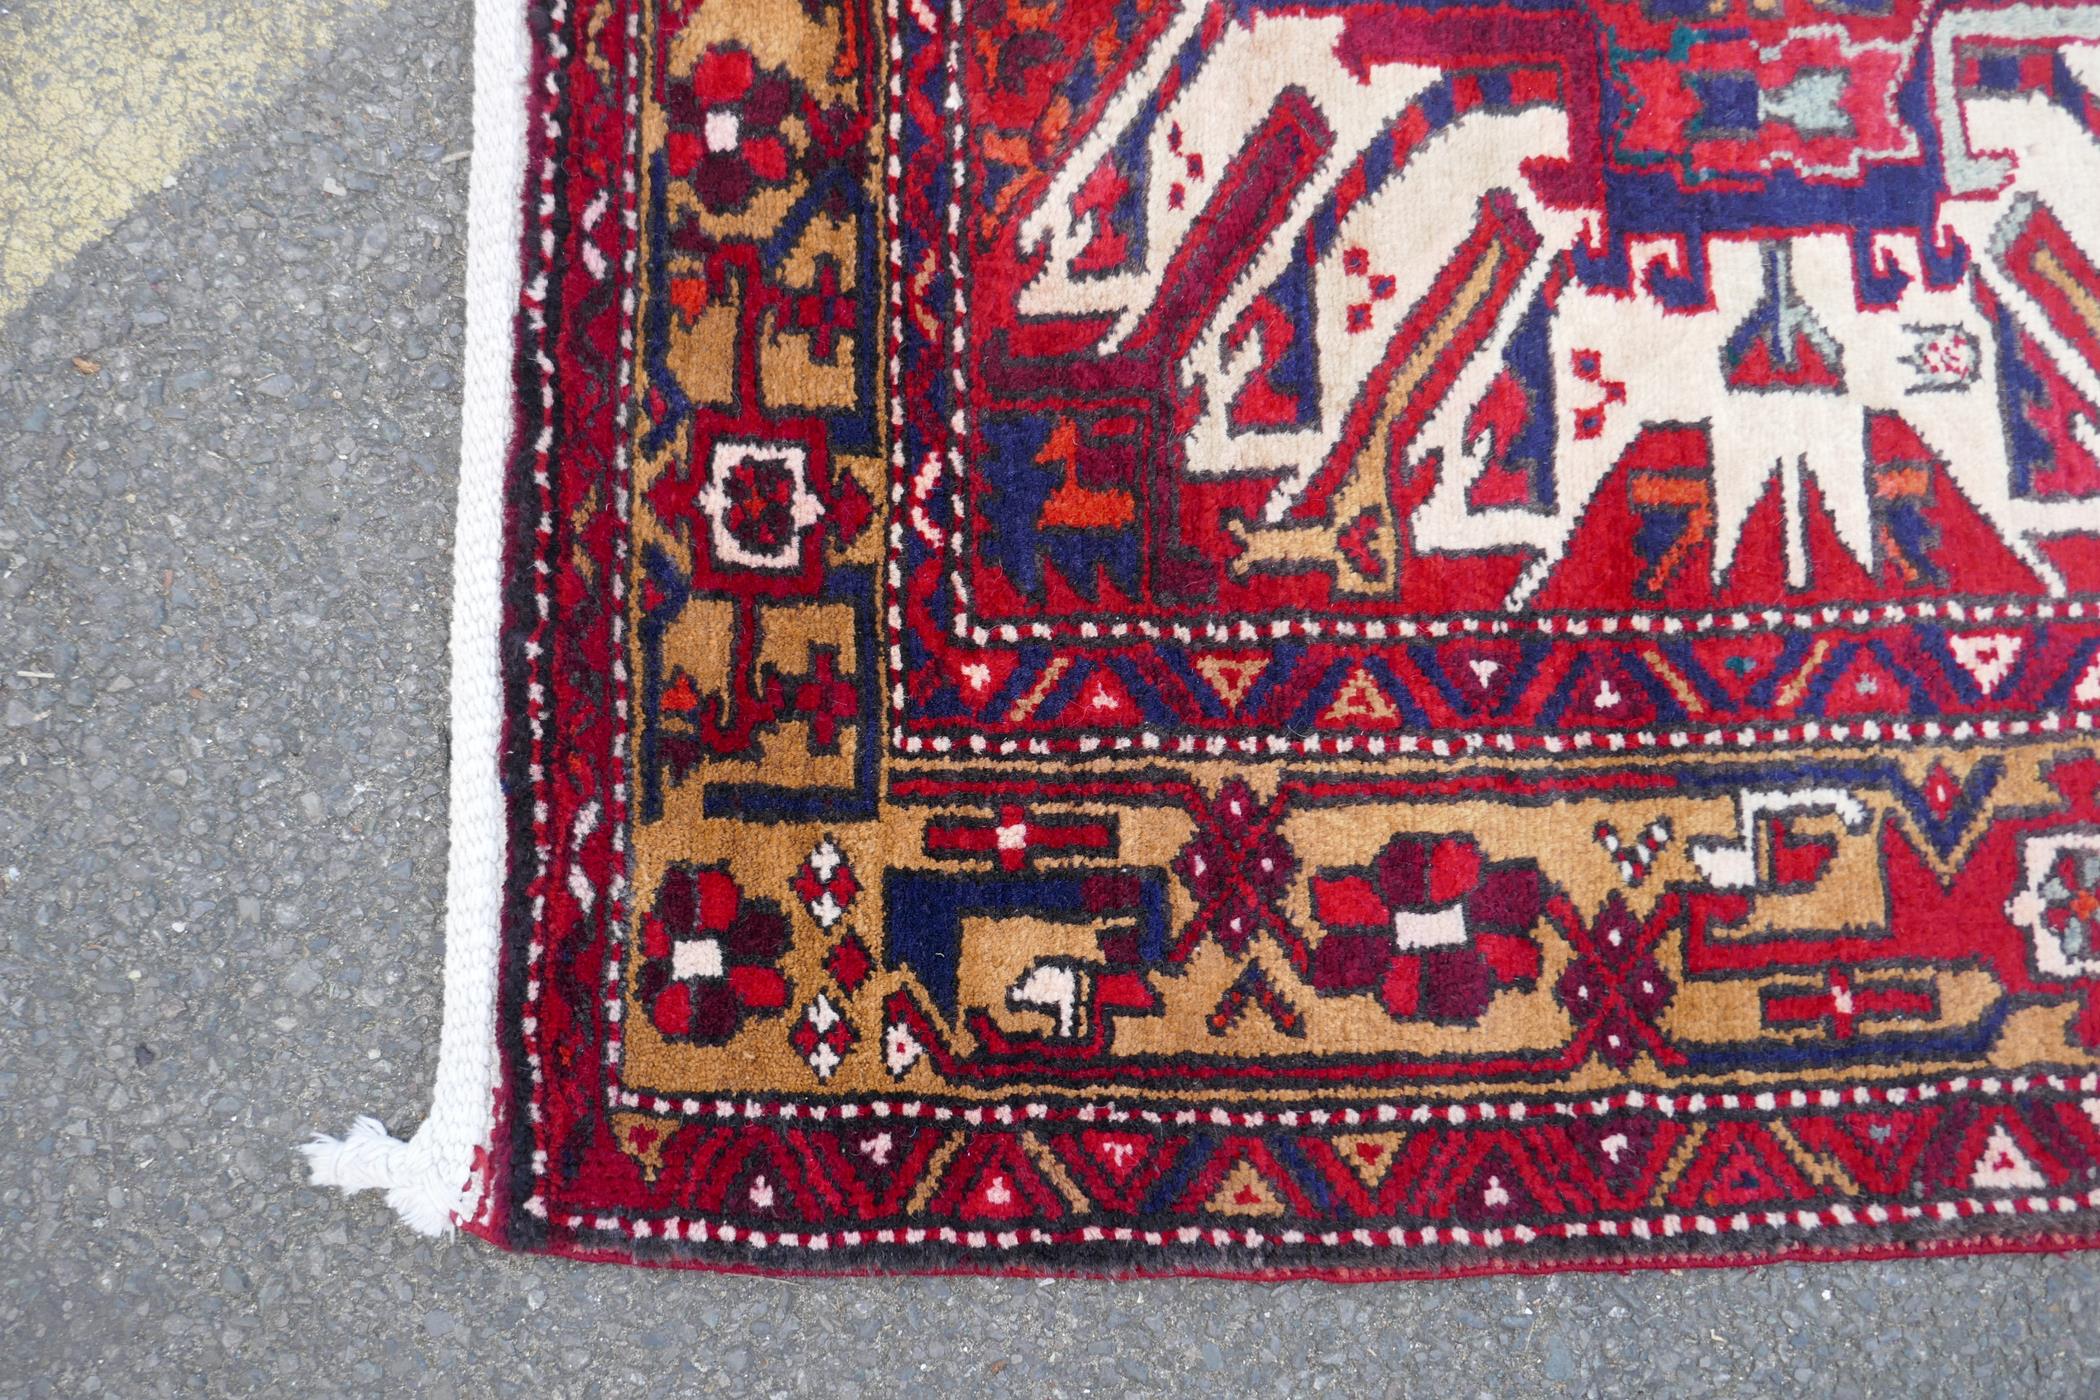 A Persian red ground Heritz runner with a starburst medallion design, 46" x 131" - Image 6 of 8